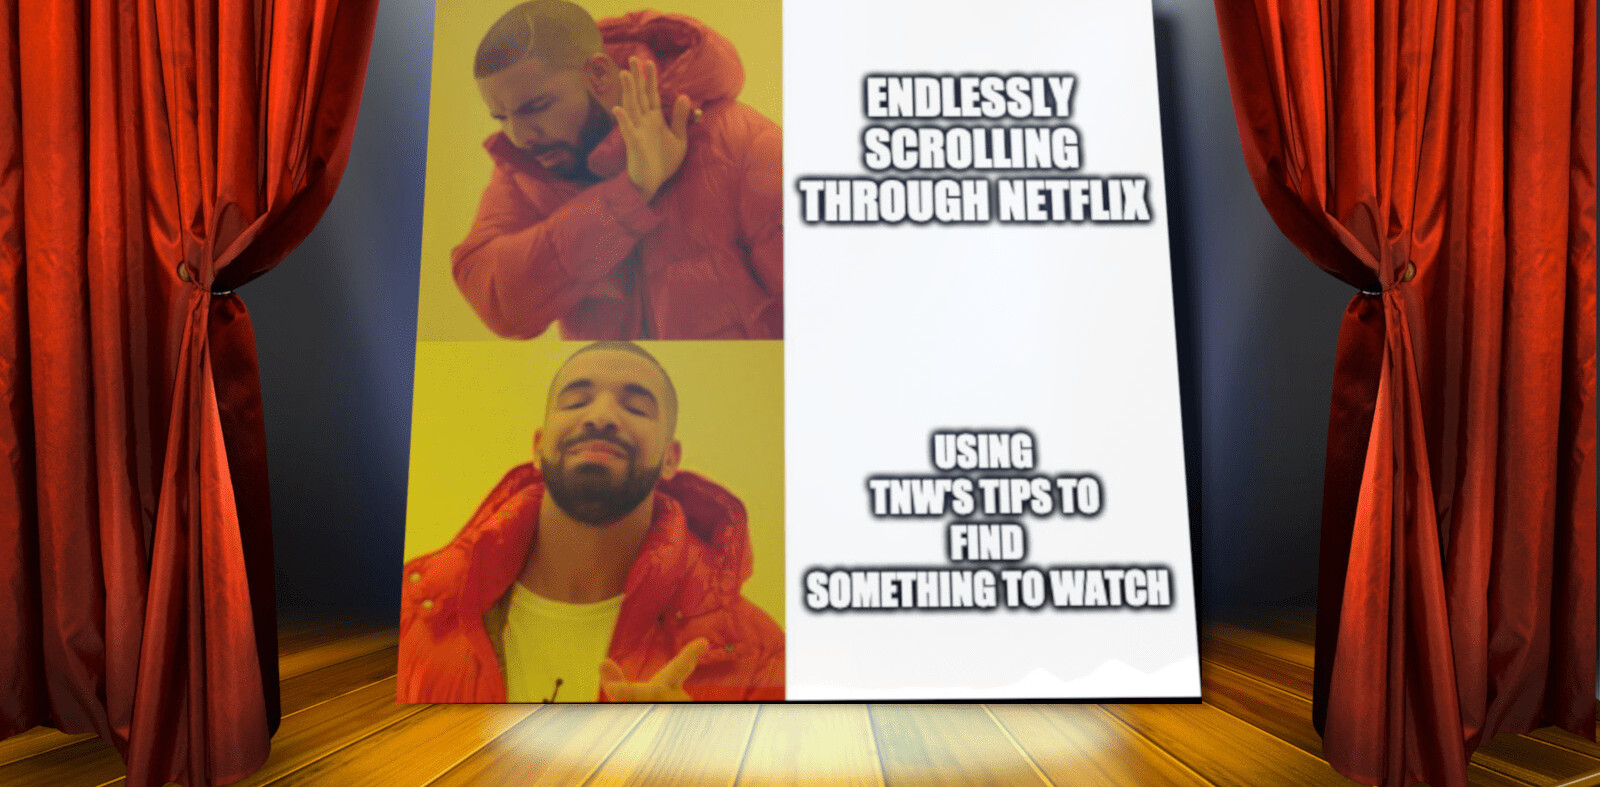 How to find something to watch on Netflix, without endless scrolling